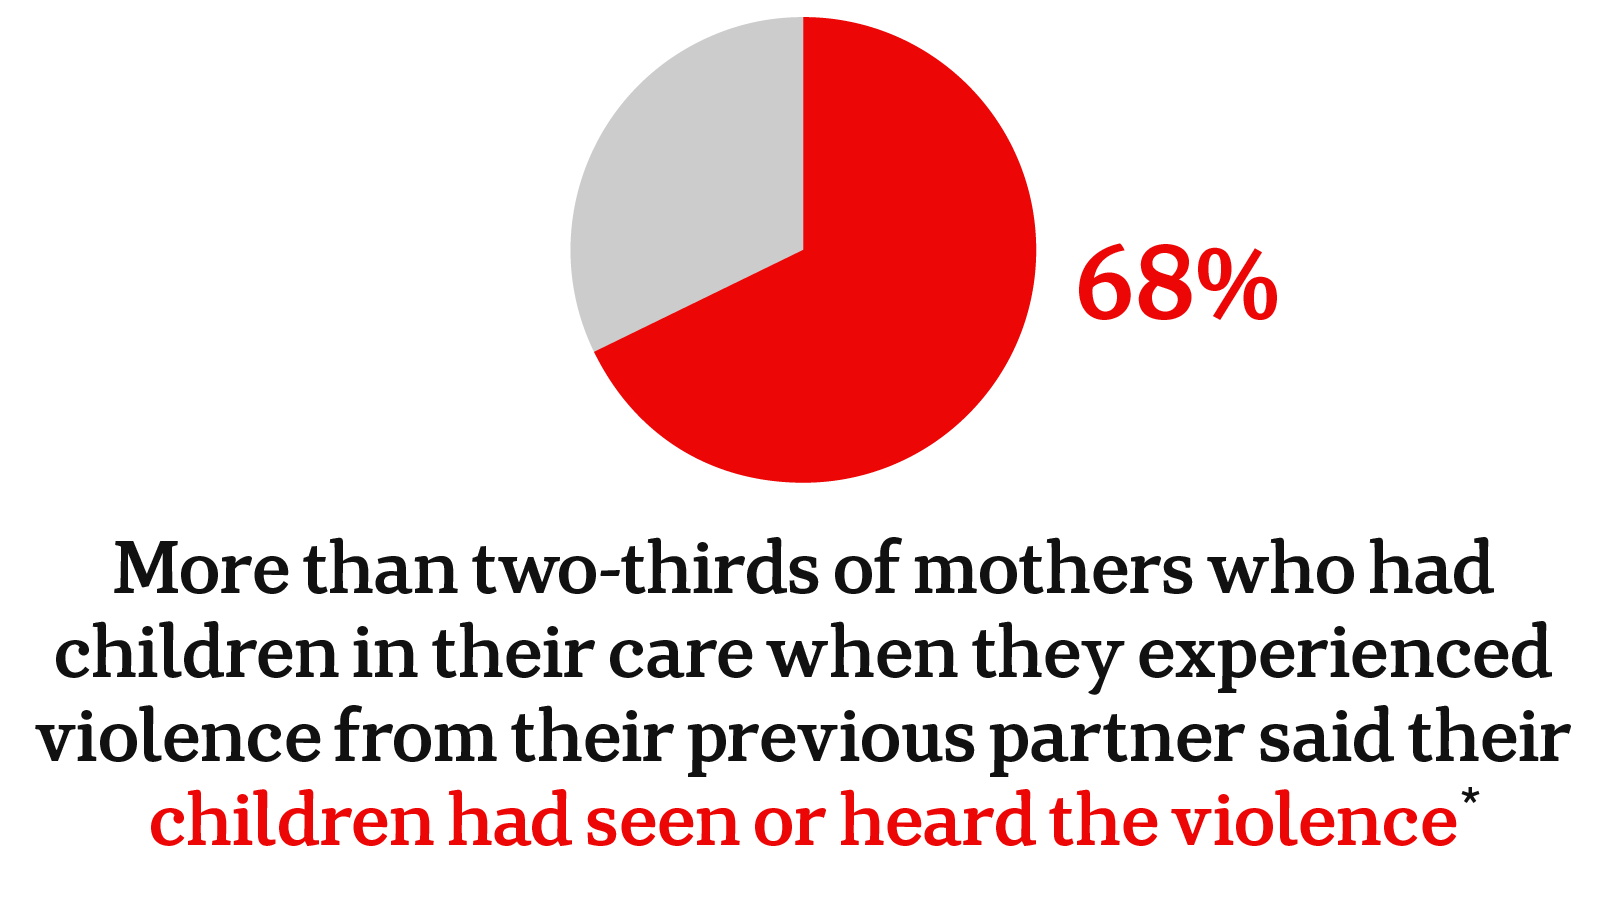 68% of mothers who had children in their care when they had experienced violence said their children had seen or heard it.